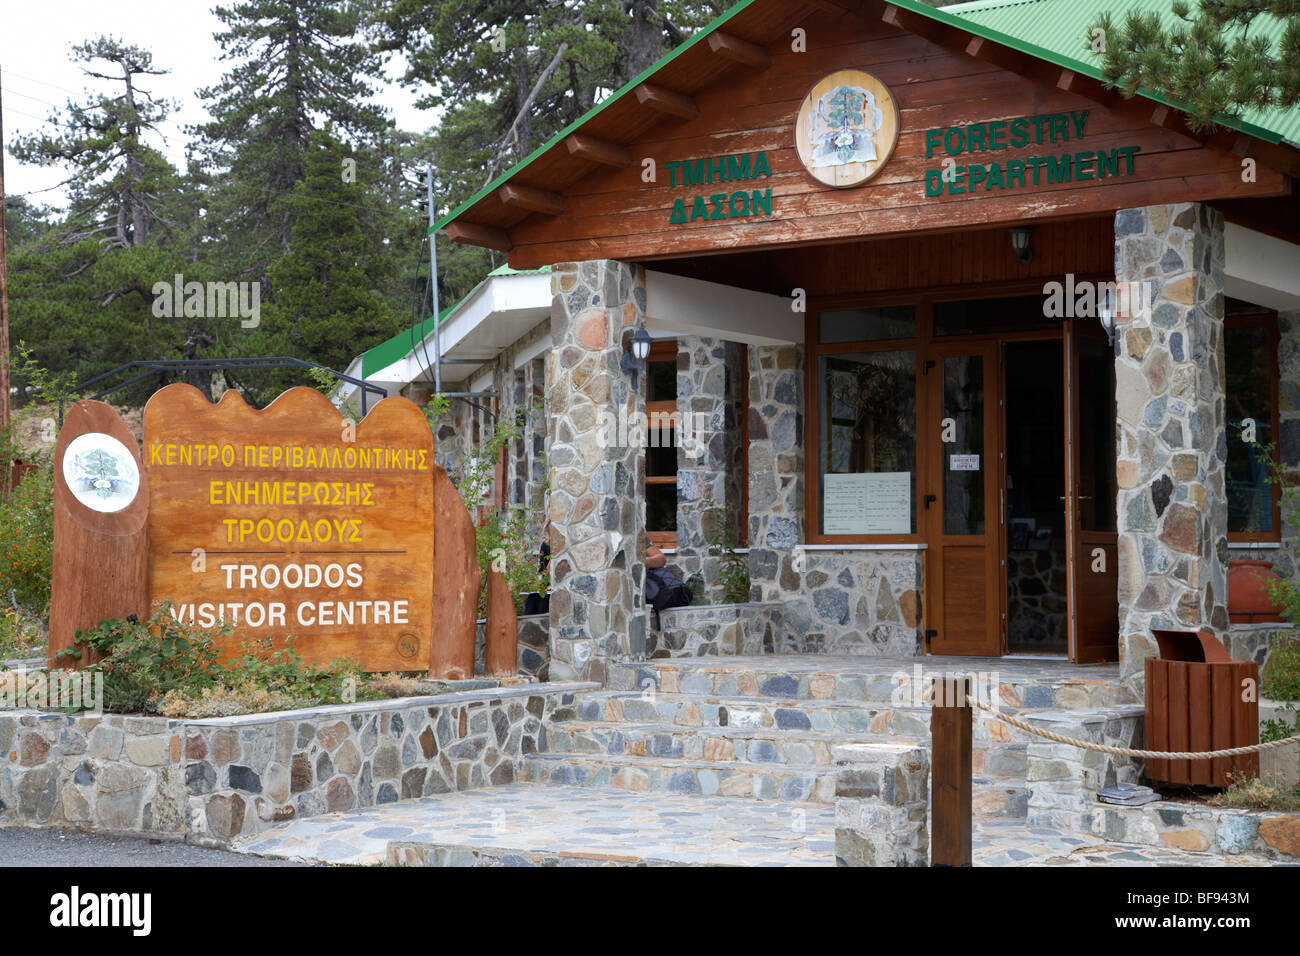 troodos visitor centre tourist information troodos square republic of cyprus europe Stock Photo